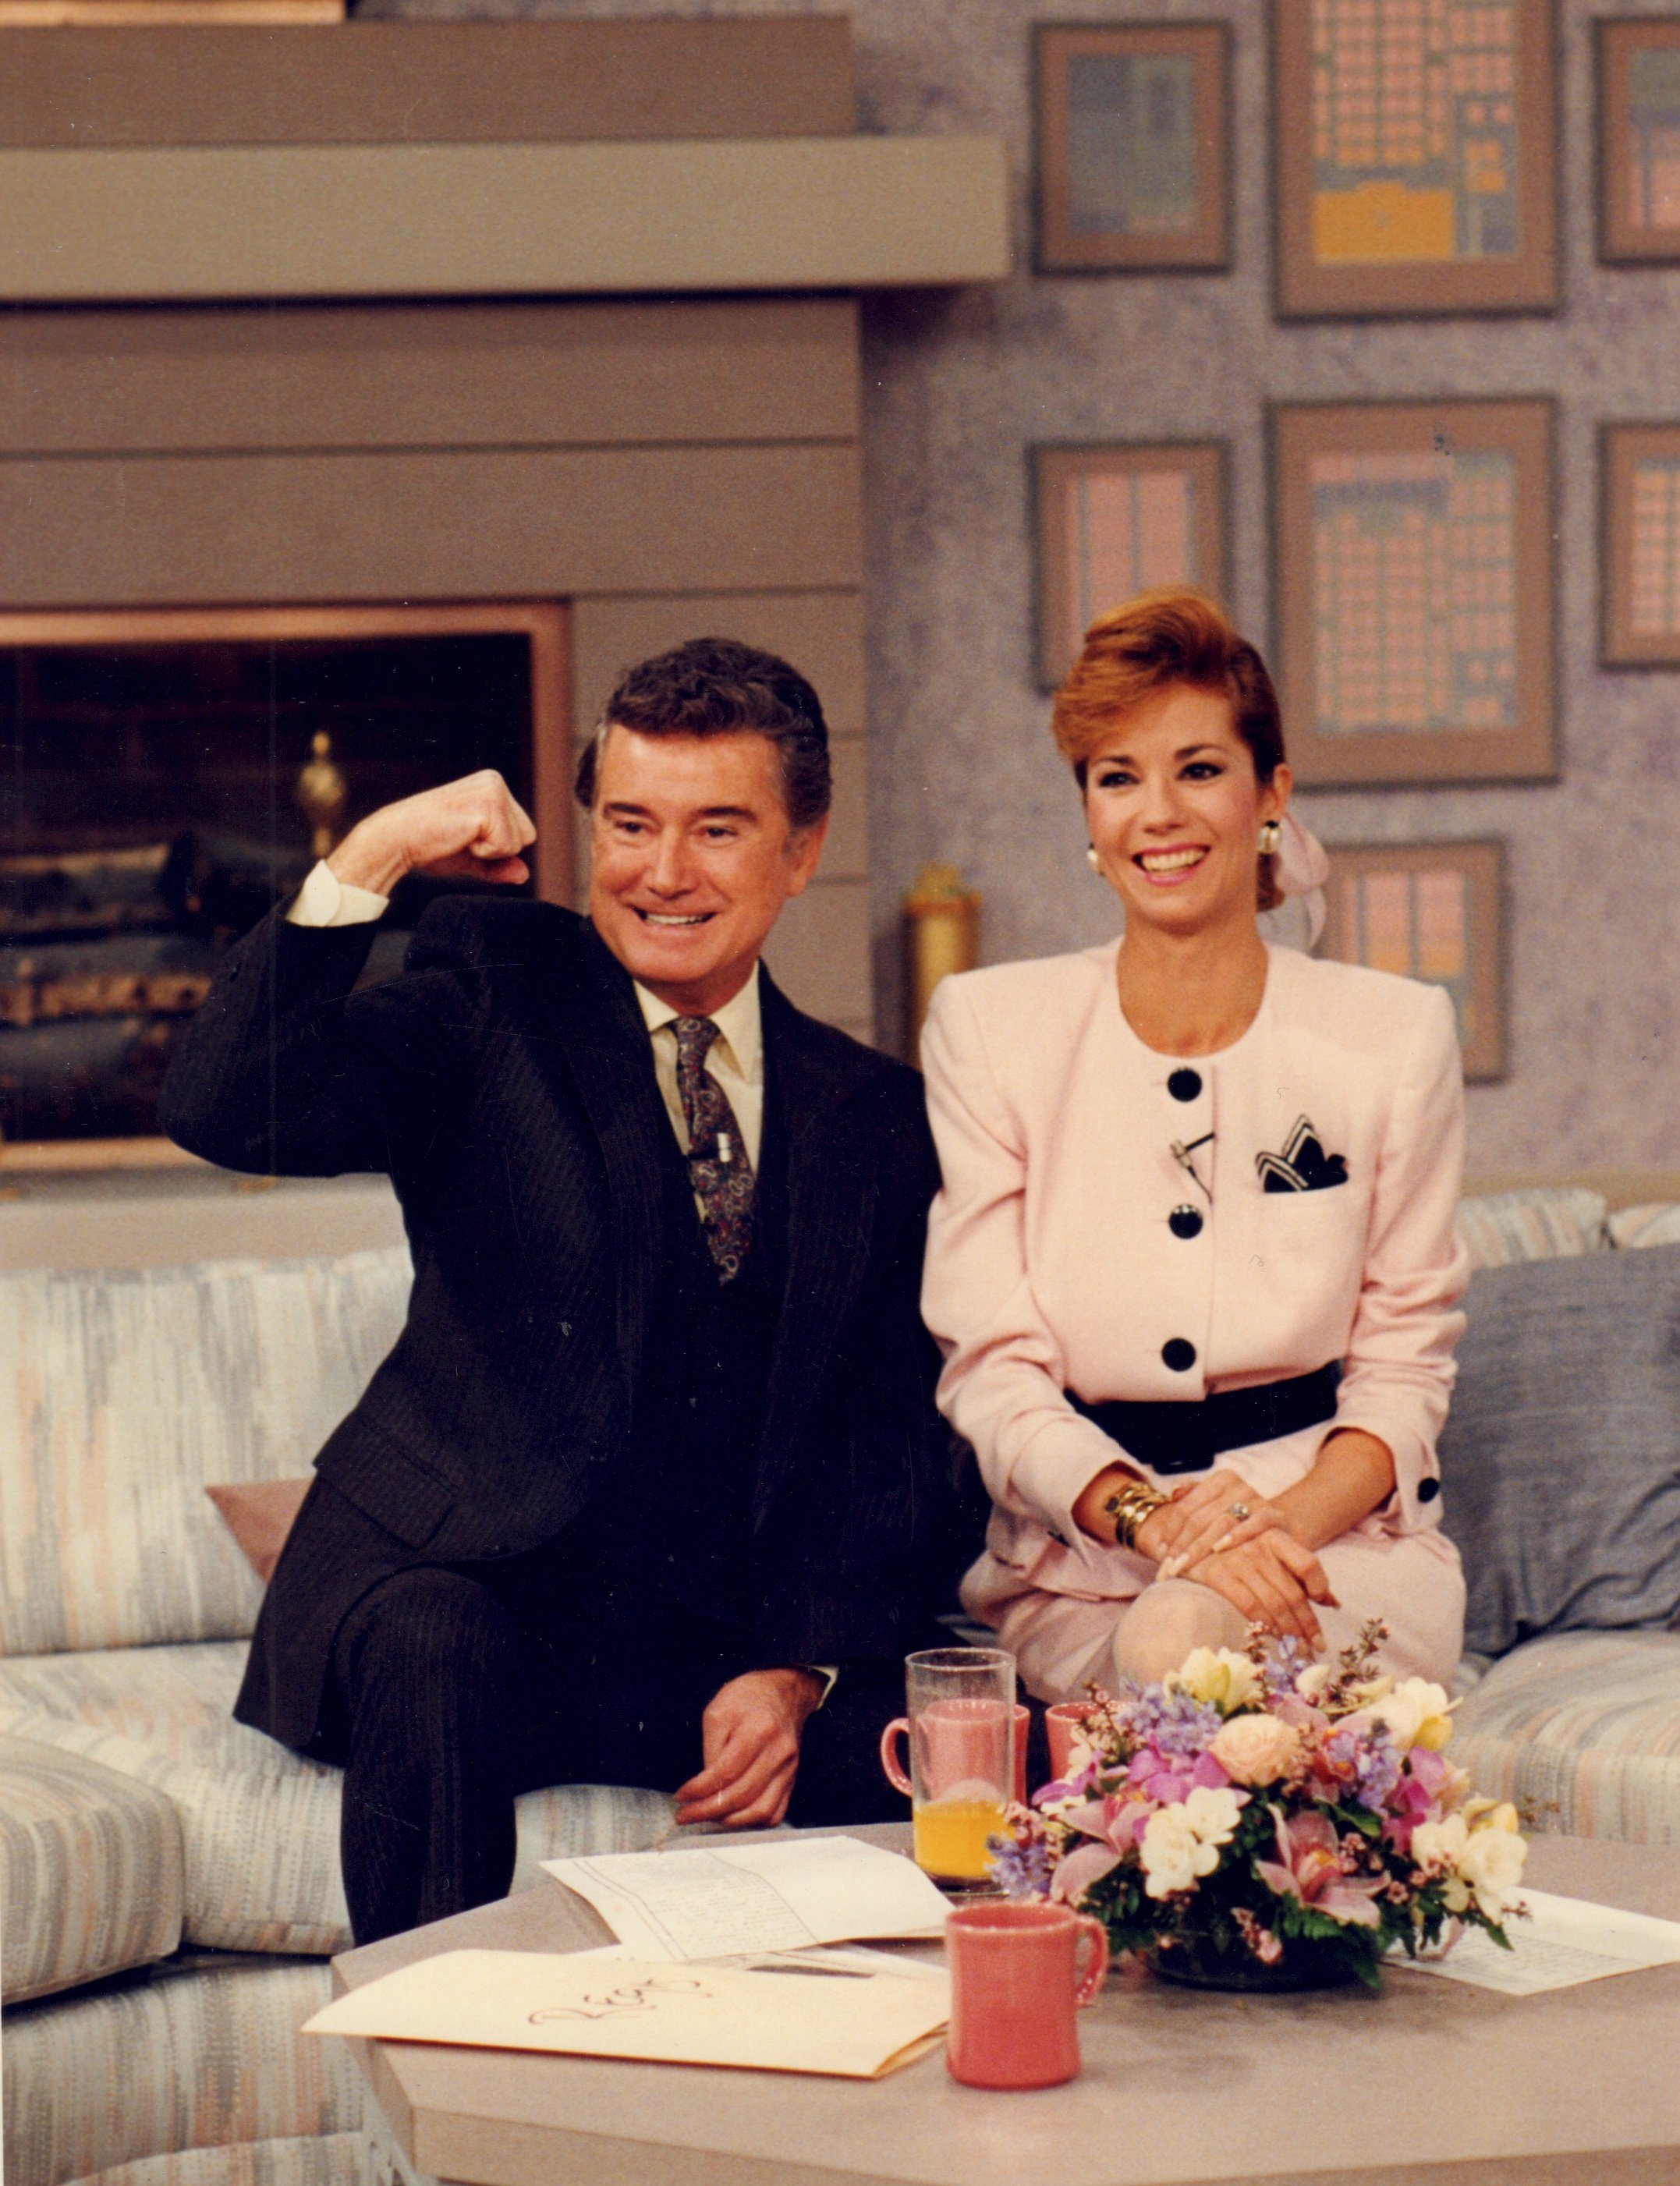 Regis Philbin and Kathie Lee Gifford captured on the set of "Live with Regis and Kathie Lee" on April 25, 1988 | Source: Getty Images